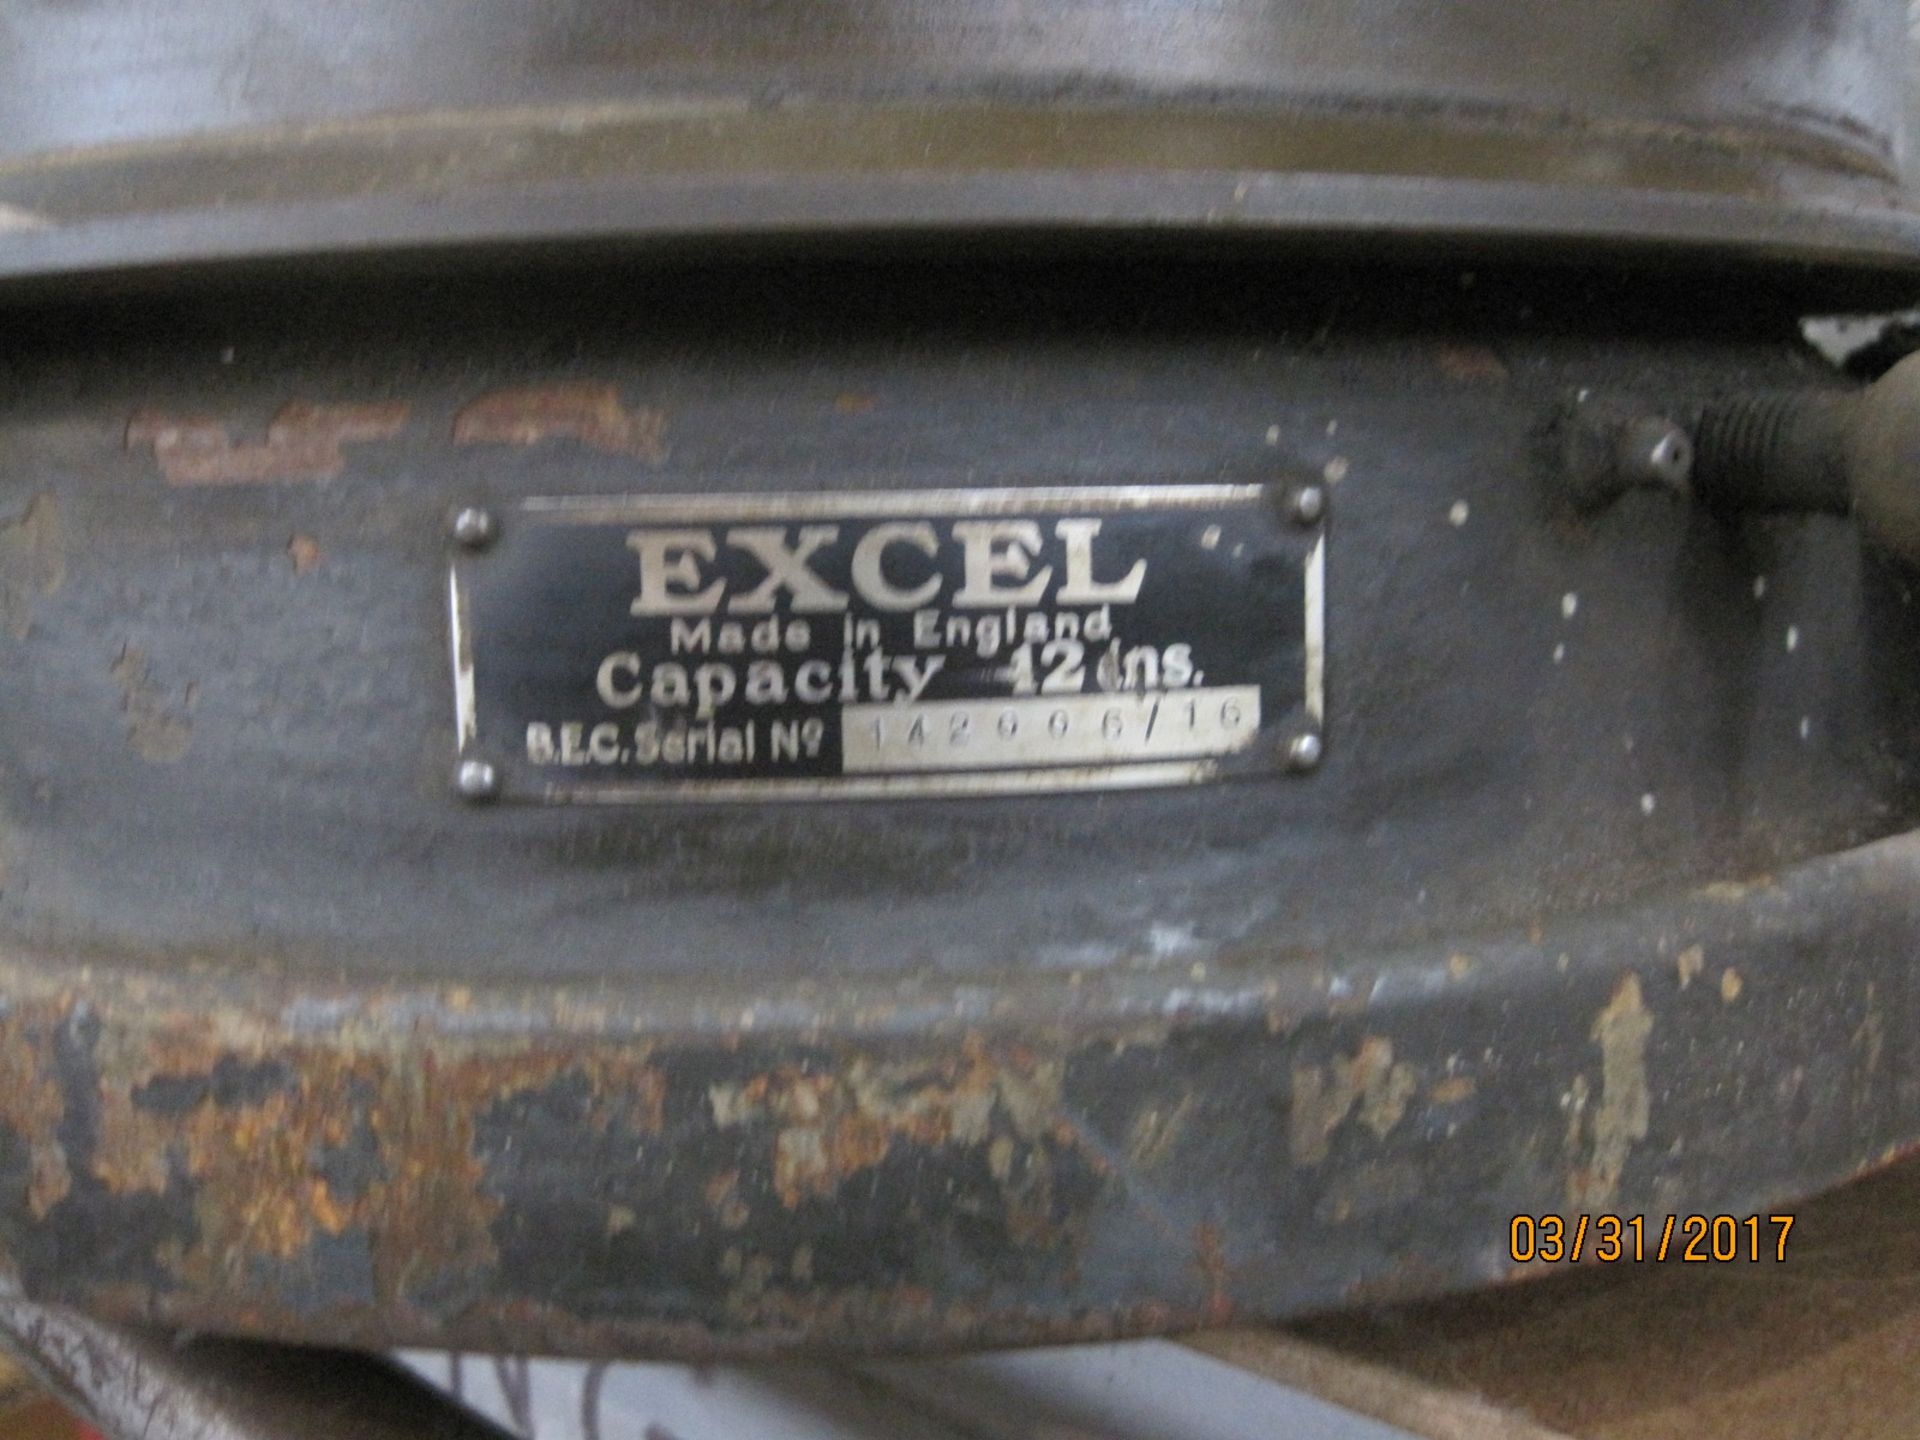 12" Excel Rotary Table - Image 2 of 3